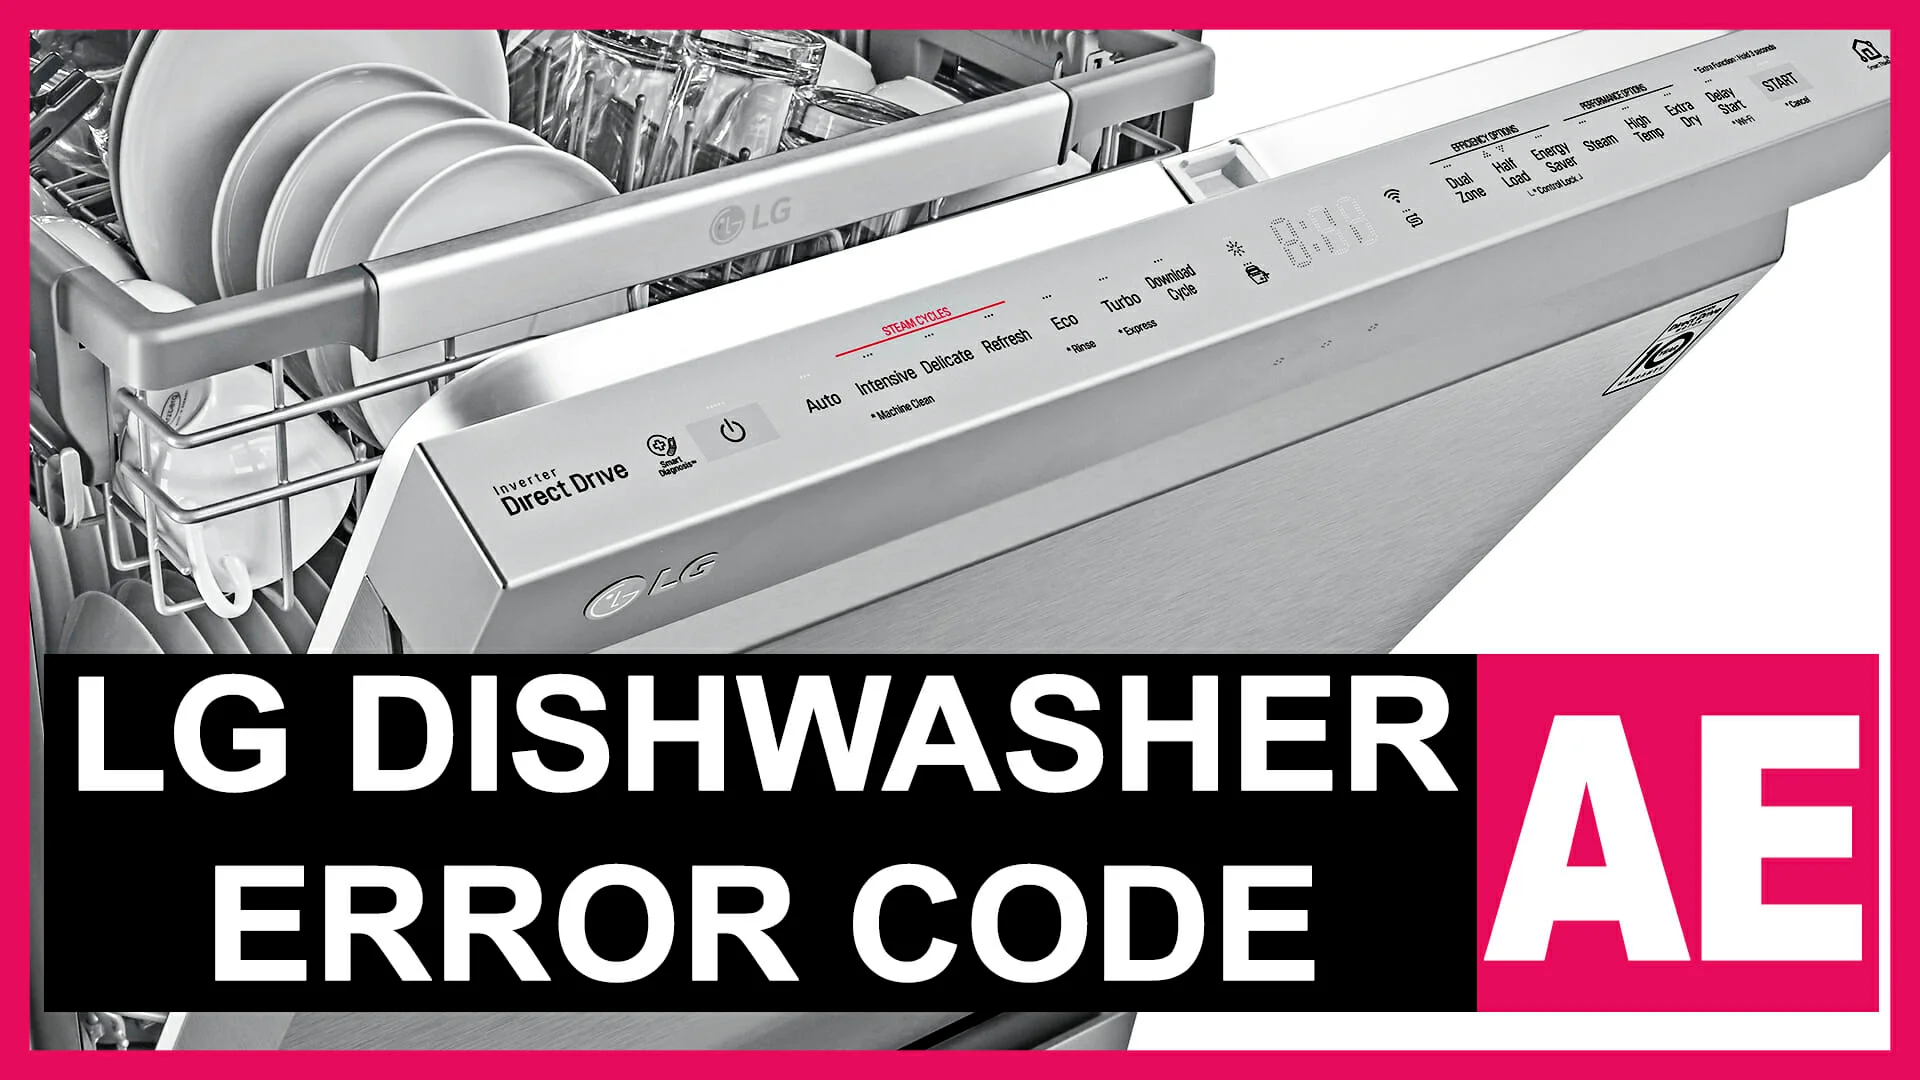 How to Troubleshoot and Reset the AE Error Code on an LG Dishwasher